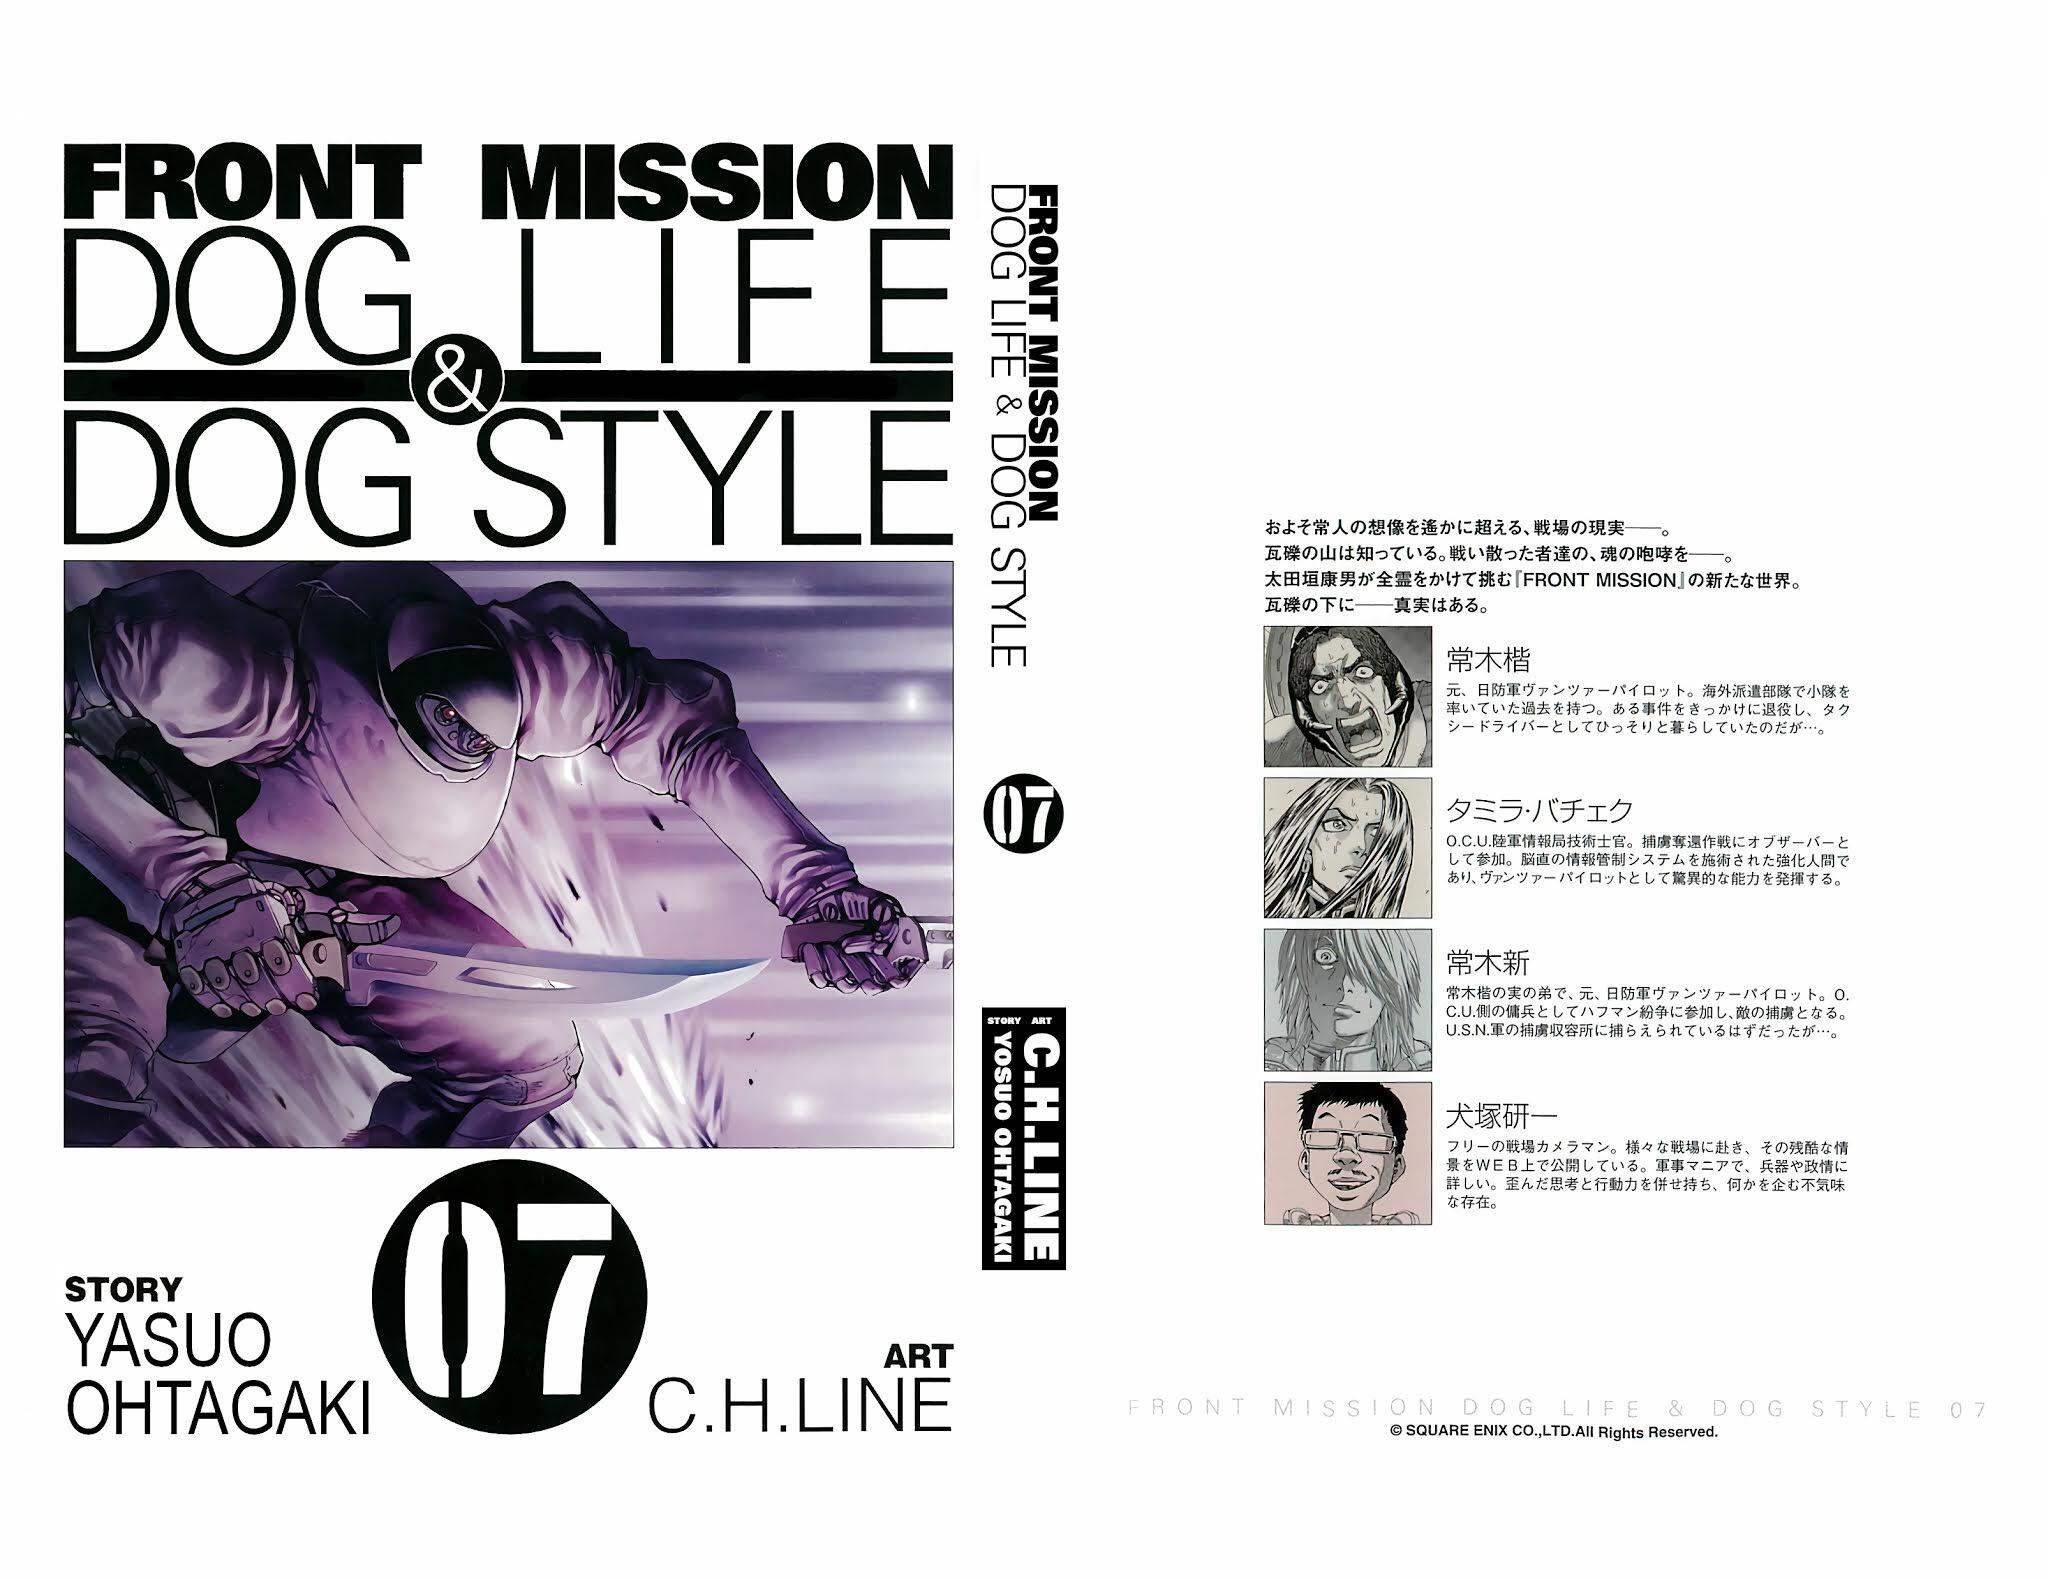 Front Mission Dog Life Dog Style Chapter 53 Read Front Mission Dog Life Dog Style Chapter 53 Online At Allmanga Us Page 1